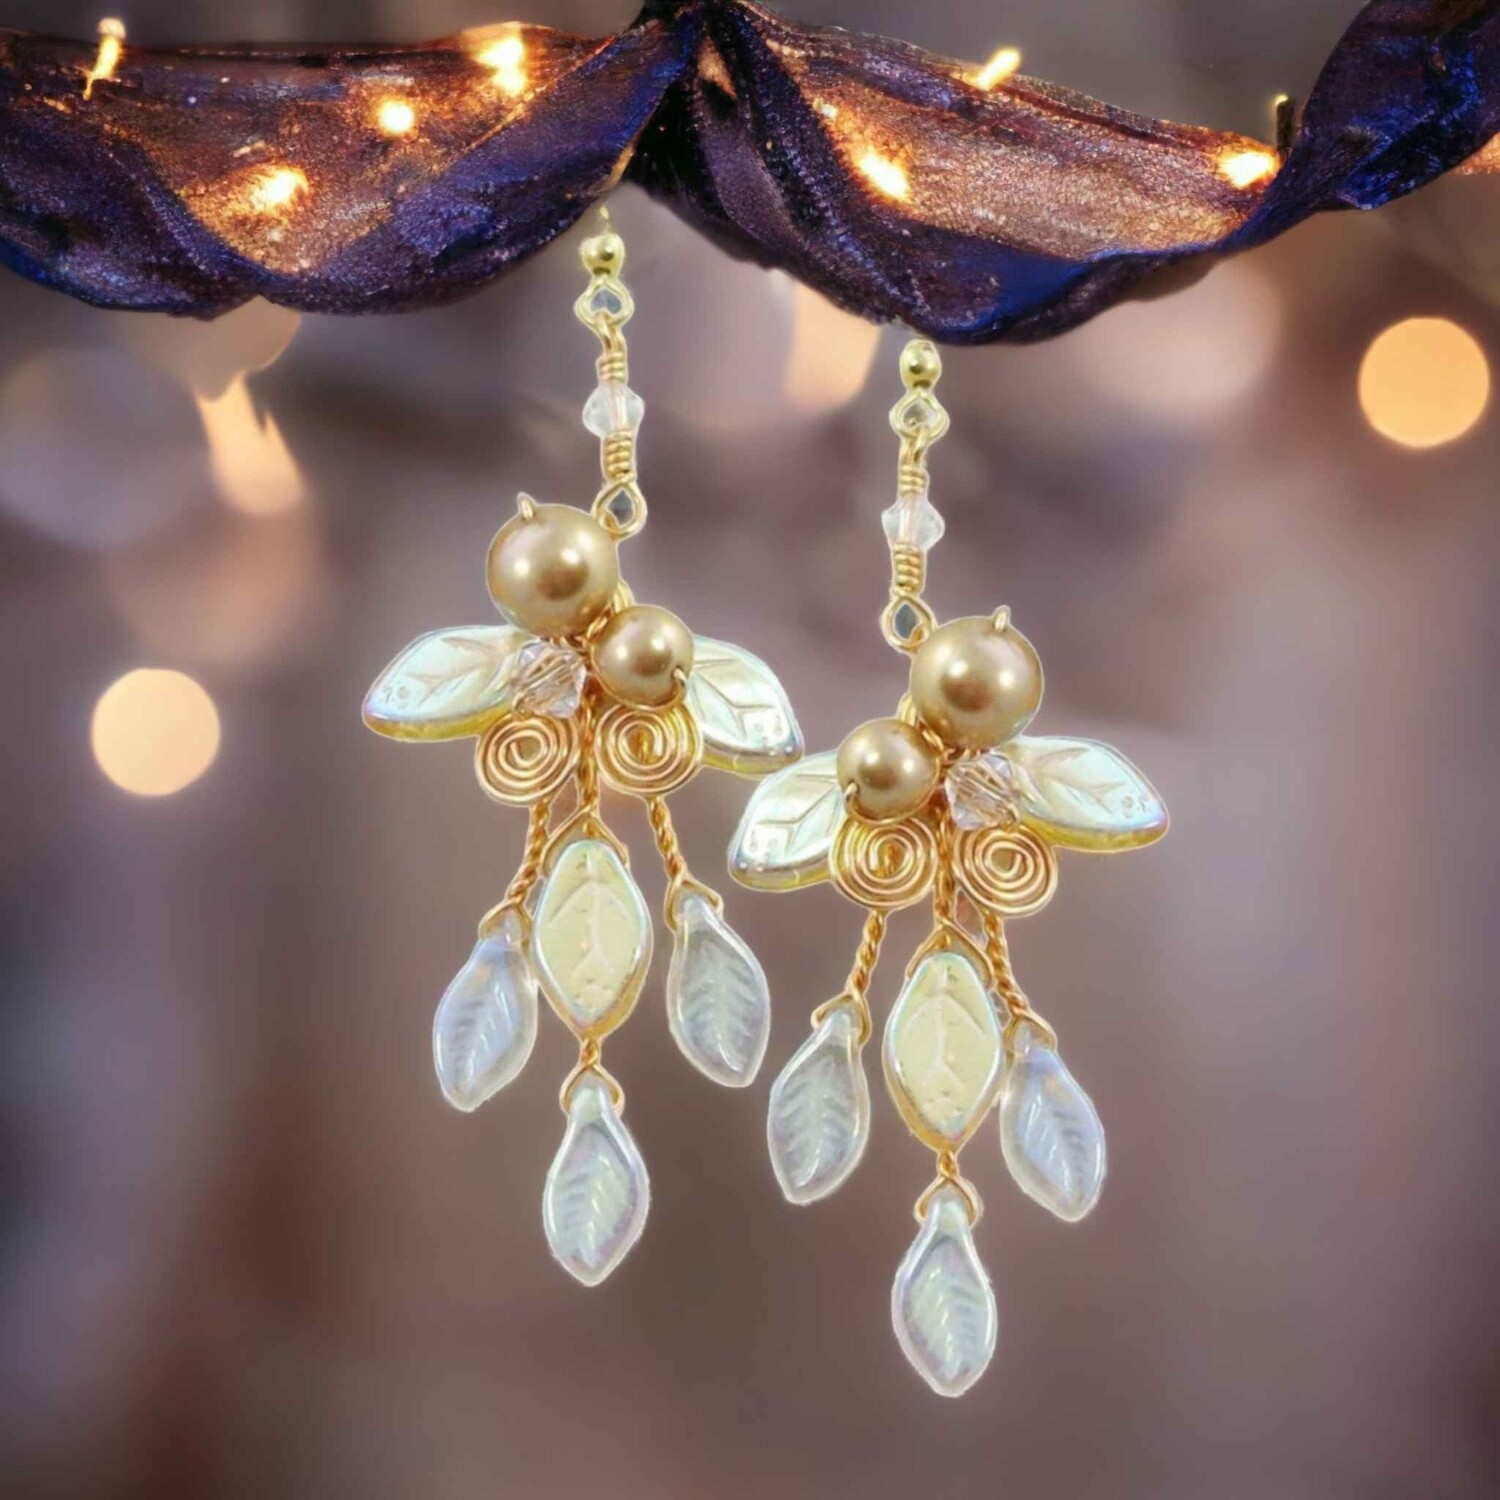 Golden Woodland Dangle Earrings Fairy Lights Holiday Collection